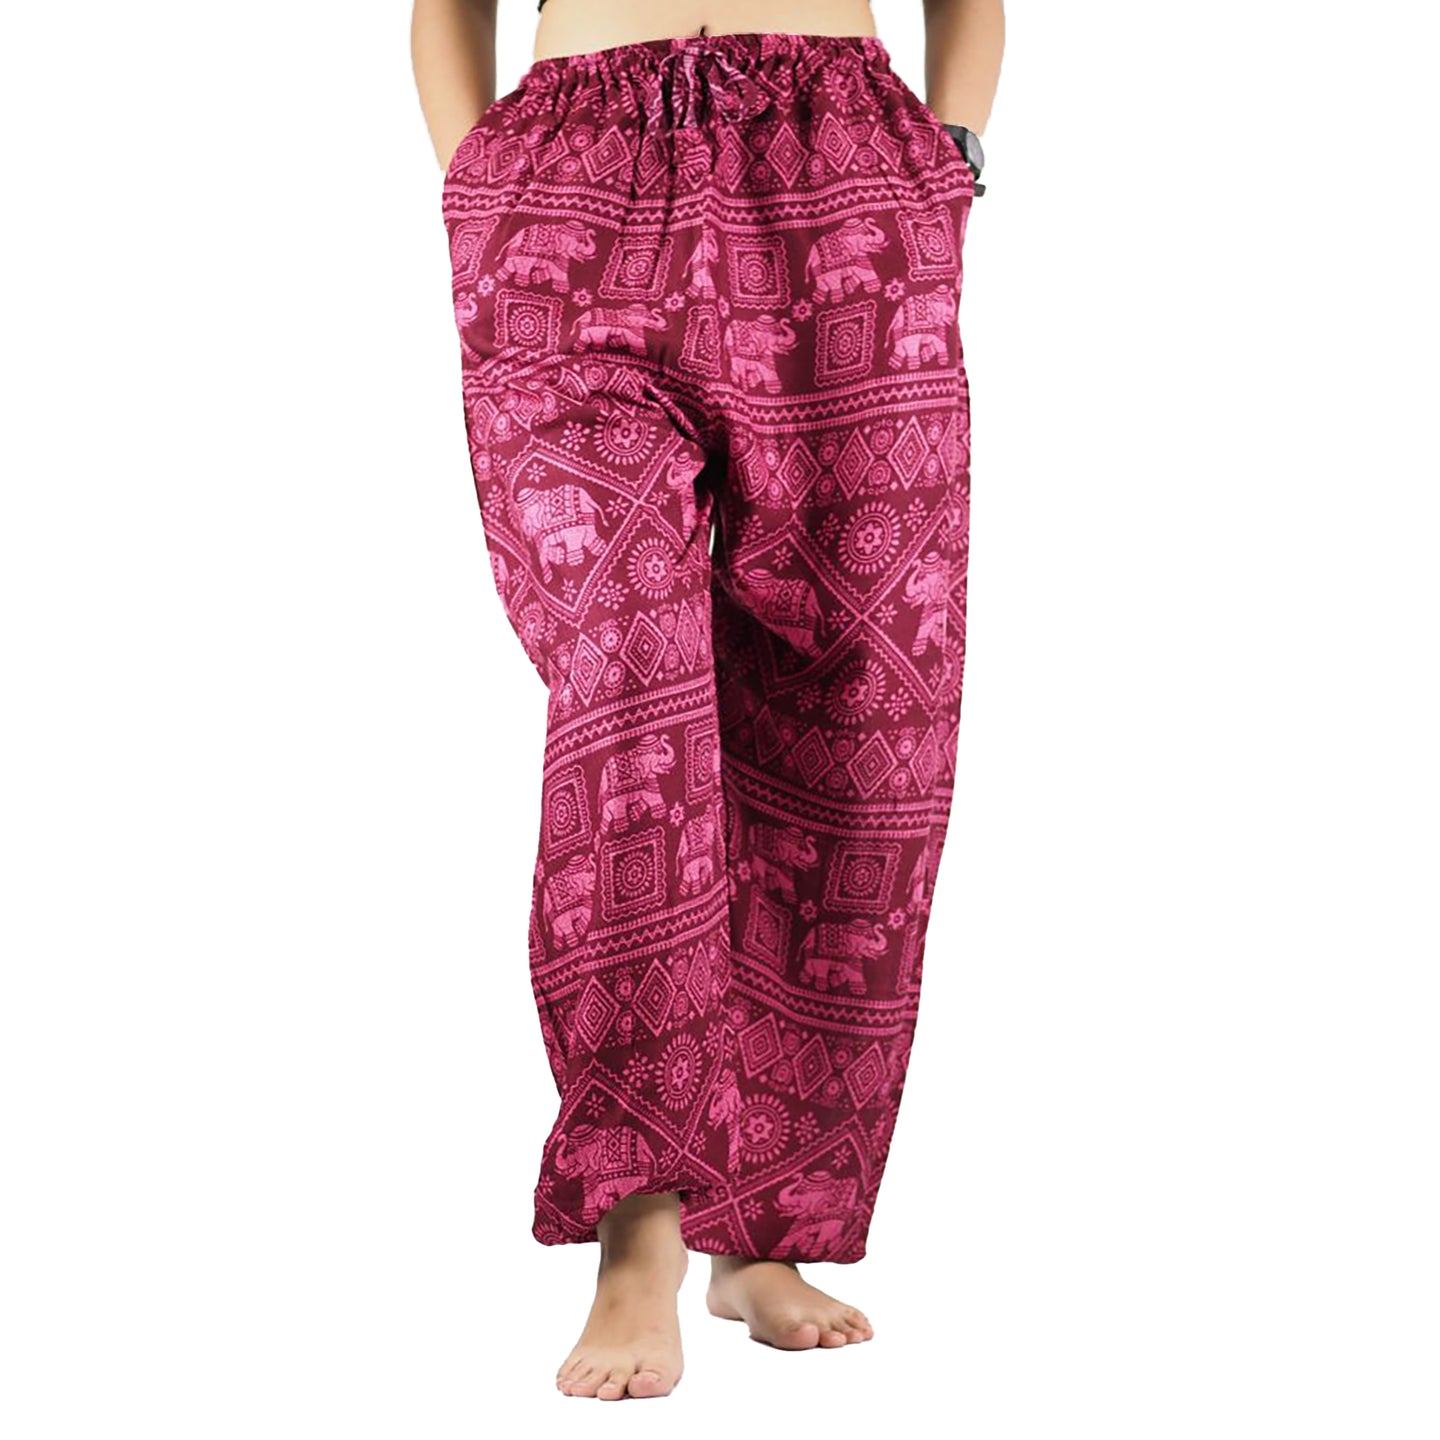 Elephant Stamp Unisex Drawstring Genie Pants in Red PP0110 020013 01